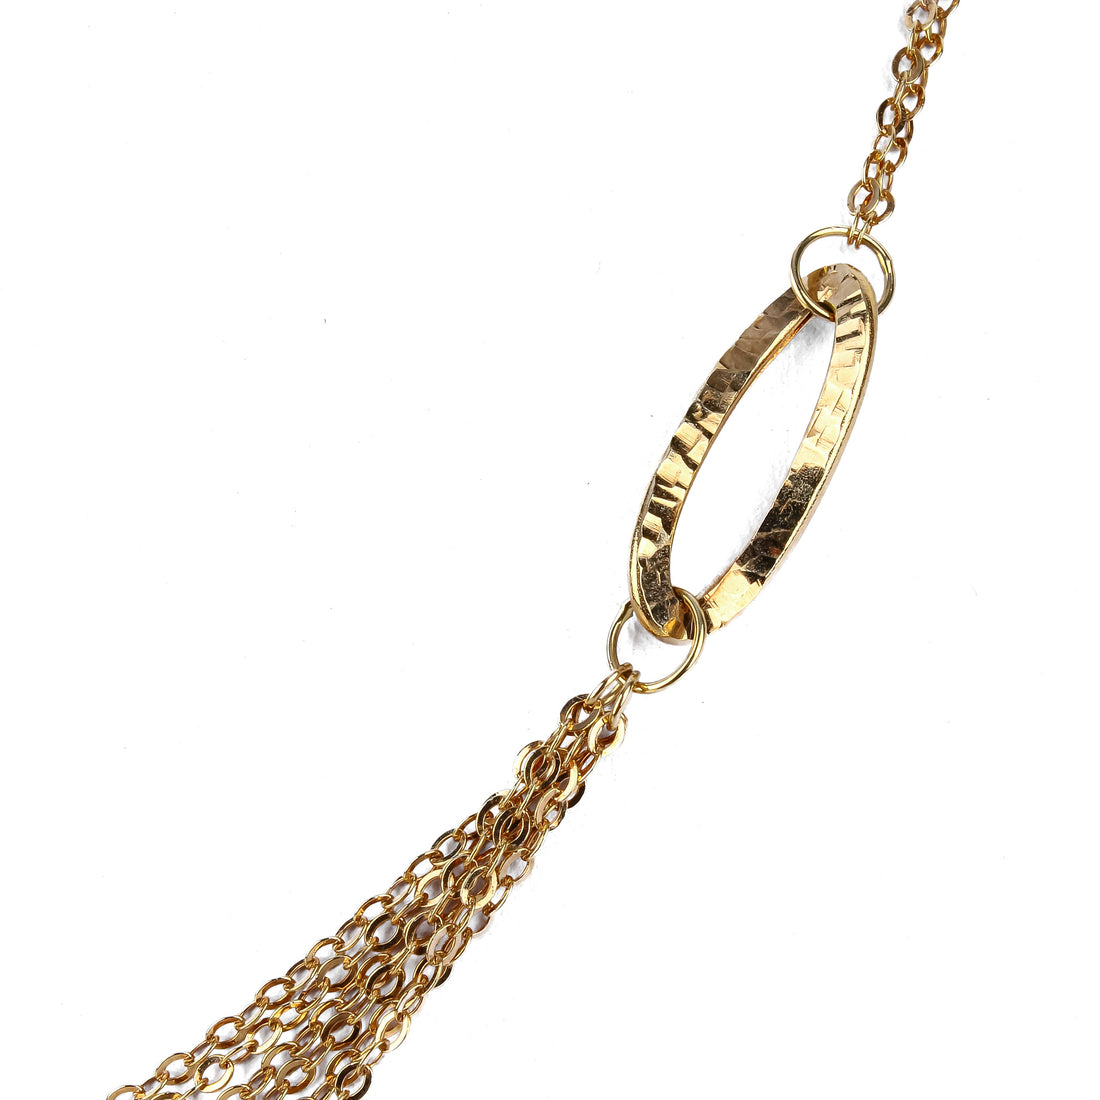 14K Yellow Gold Multi-Strand Oval Link Necklace